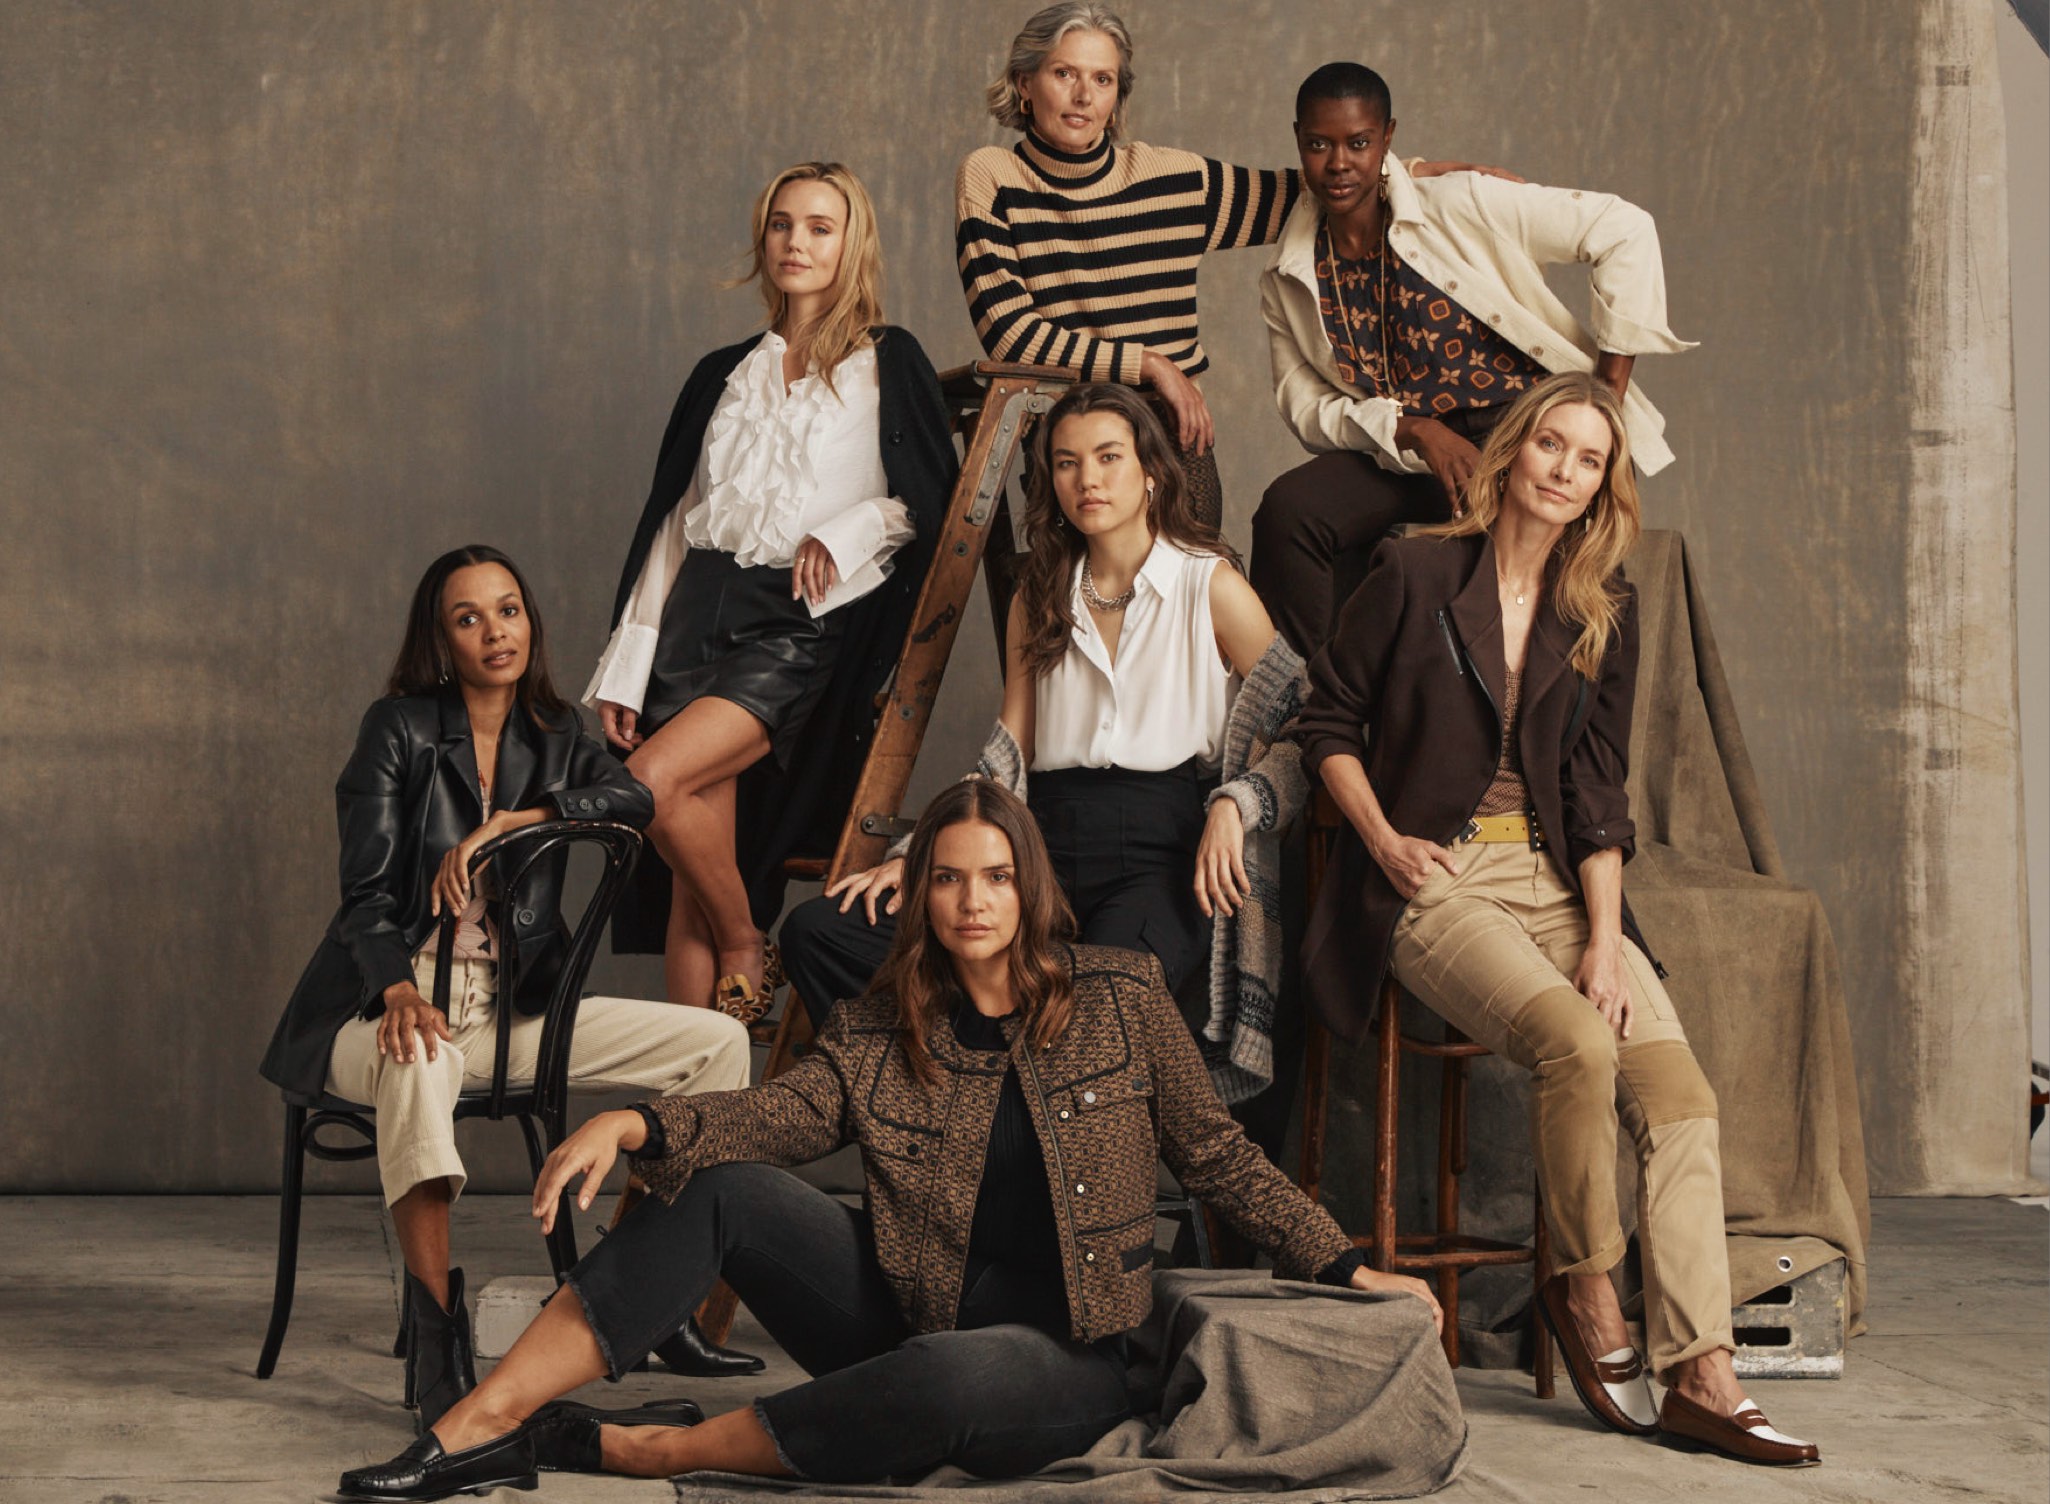 Models modeling the Fall 2023 Collection. First model is wearing Meadow Top in Daisy Print, Palm Beach Crop in Bone, and James Jacket in Black. Second model is wearing Noble Blouse in White, Jett Skort in Black, James Jacket in Black. Third model is wearing Polo Turtleneck in Black and Cream and Director Trouser in Multi. Fourth model is wearing Louis Top in Medallion Print, Scout Jacket in Bone, and Compass Pant in Dark Chocolate. Fifth model is wearing Poetry Top in White, Boyfriend Cardigan in Multi, and Chargo in Black. Sixth model is wearing Sassy Top in Tile Print, Legacy Topper in Dark Chocolate, and Captain Pant in Khaki. Seventh model is wearing Starlet Shell in Black, High-Low Crop in Washed Black, and Director Jacket in Multi.